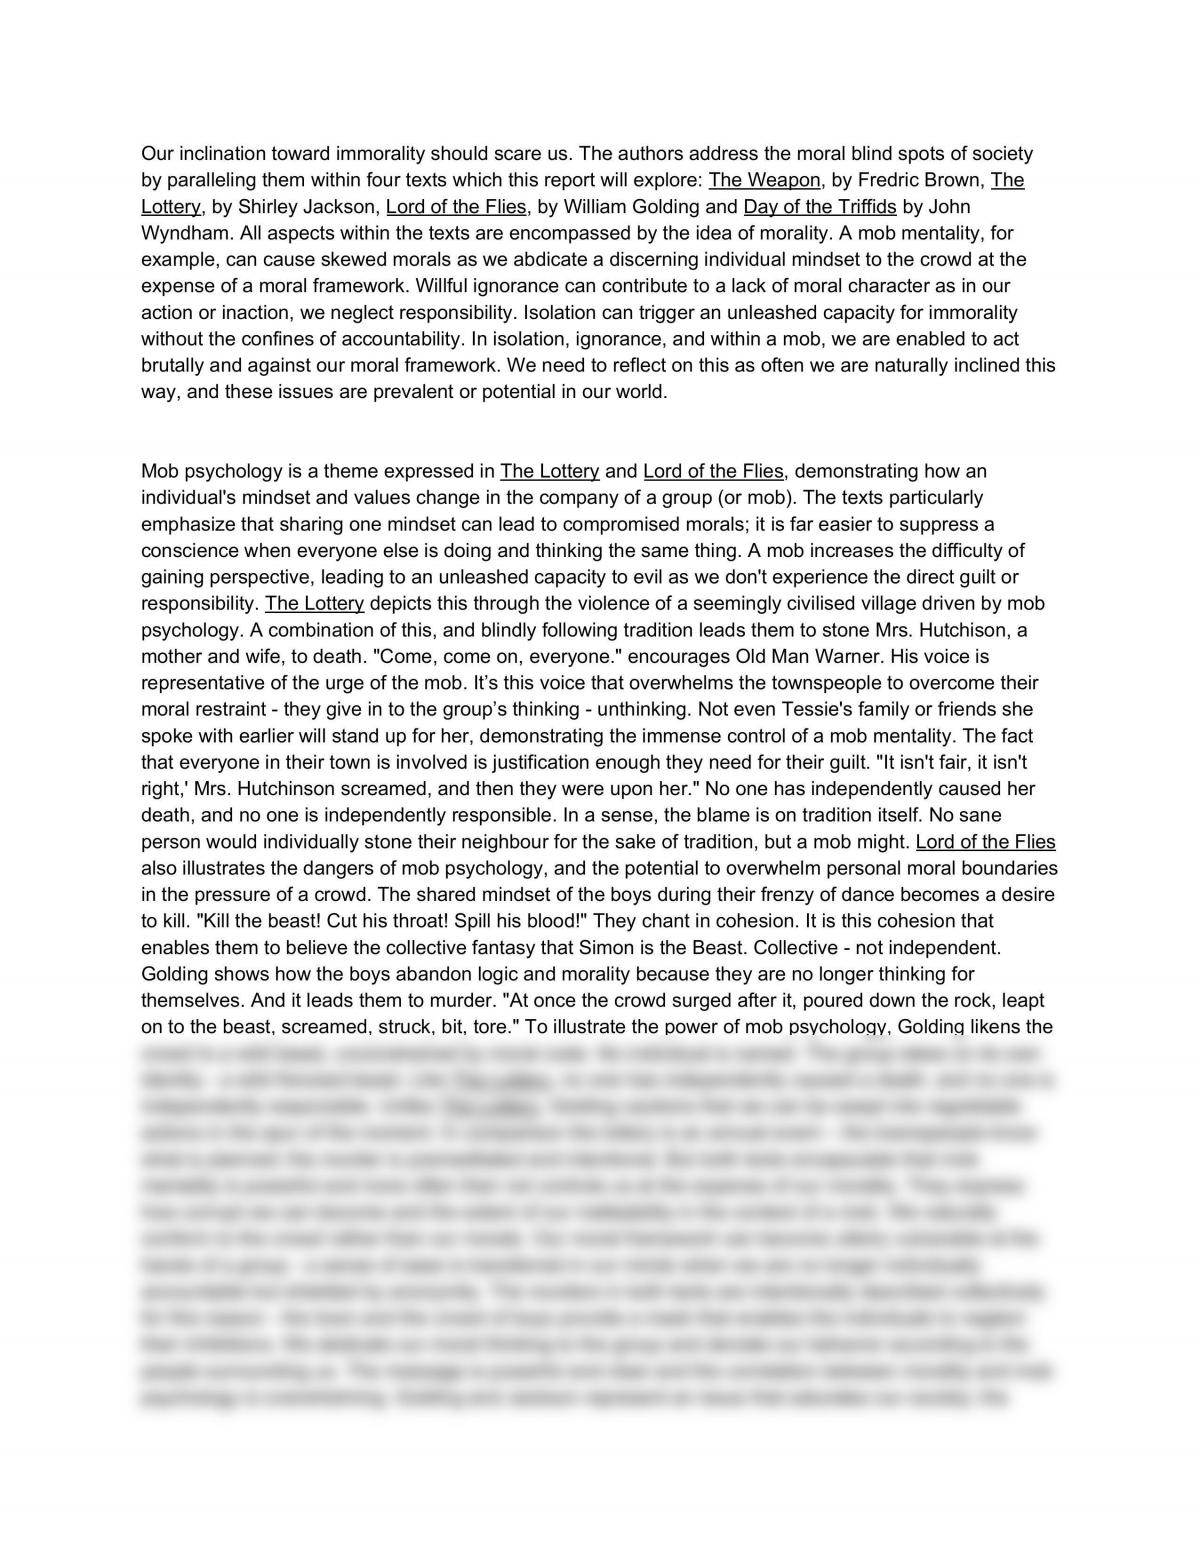 Connections Across Texts  - Page 1